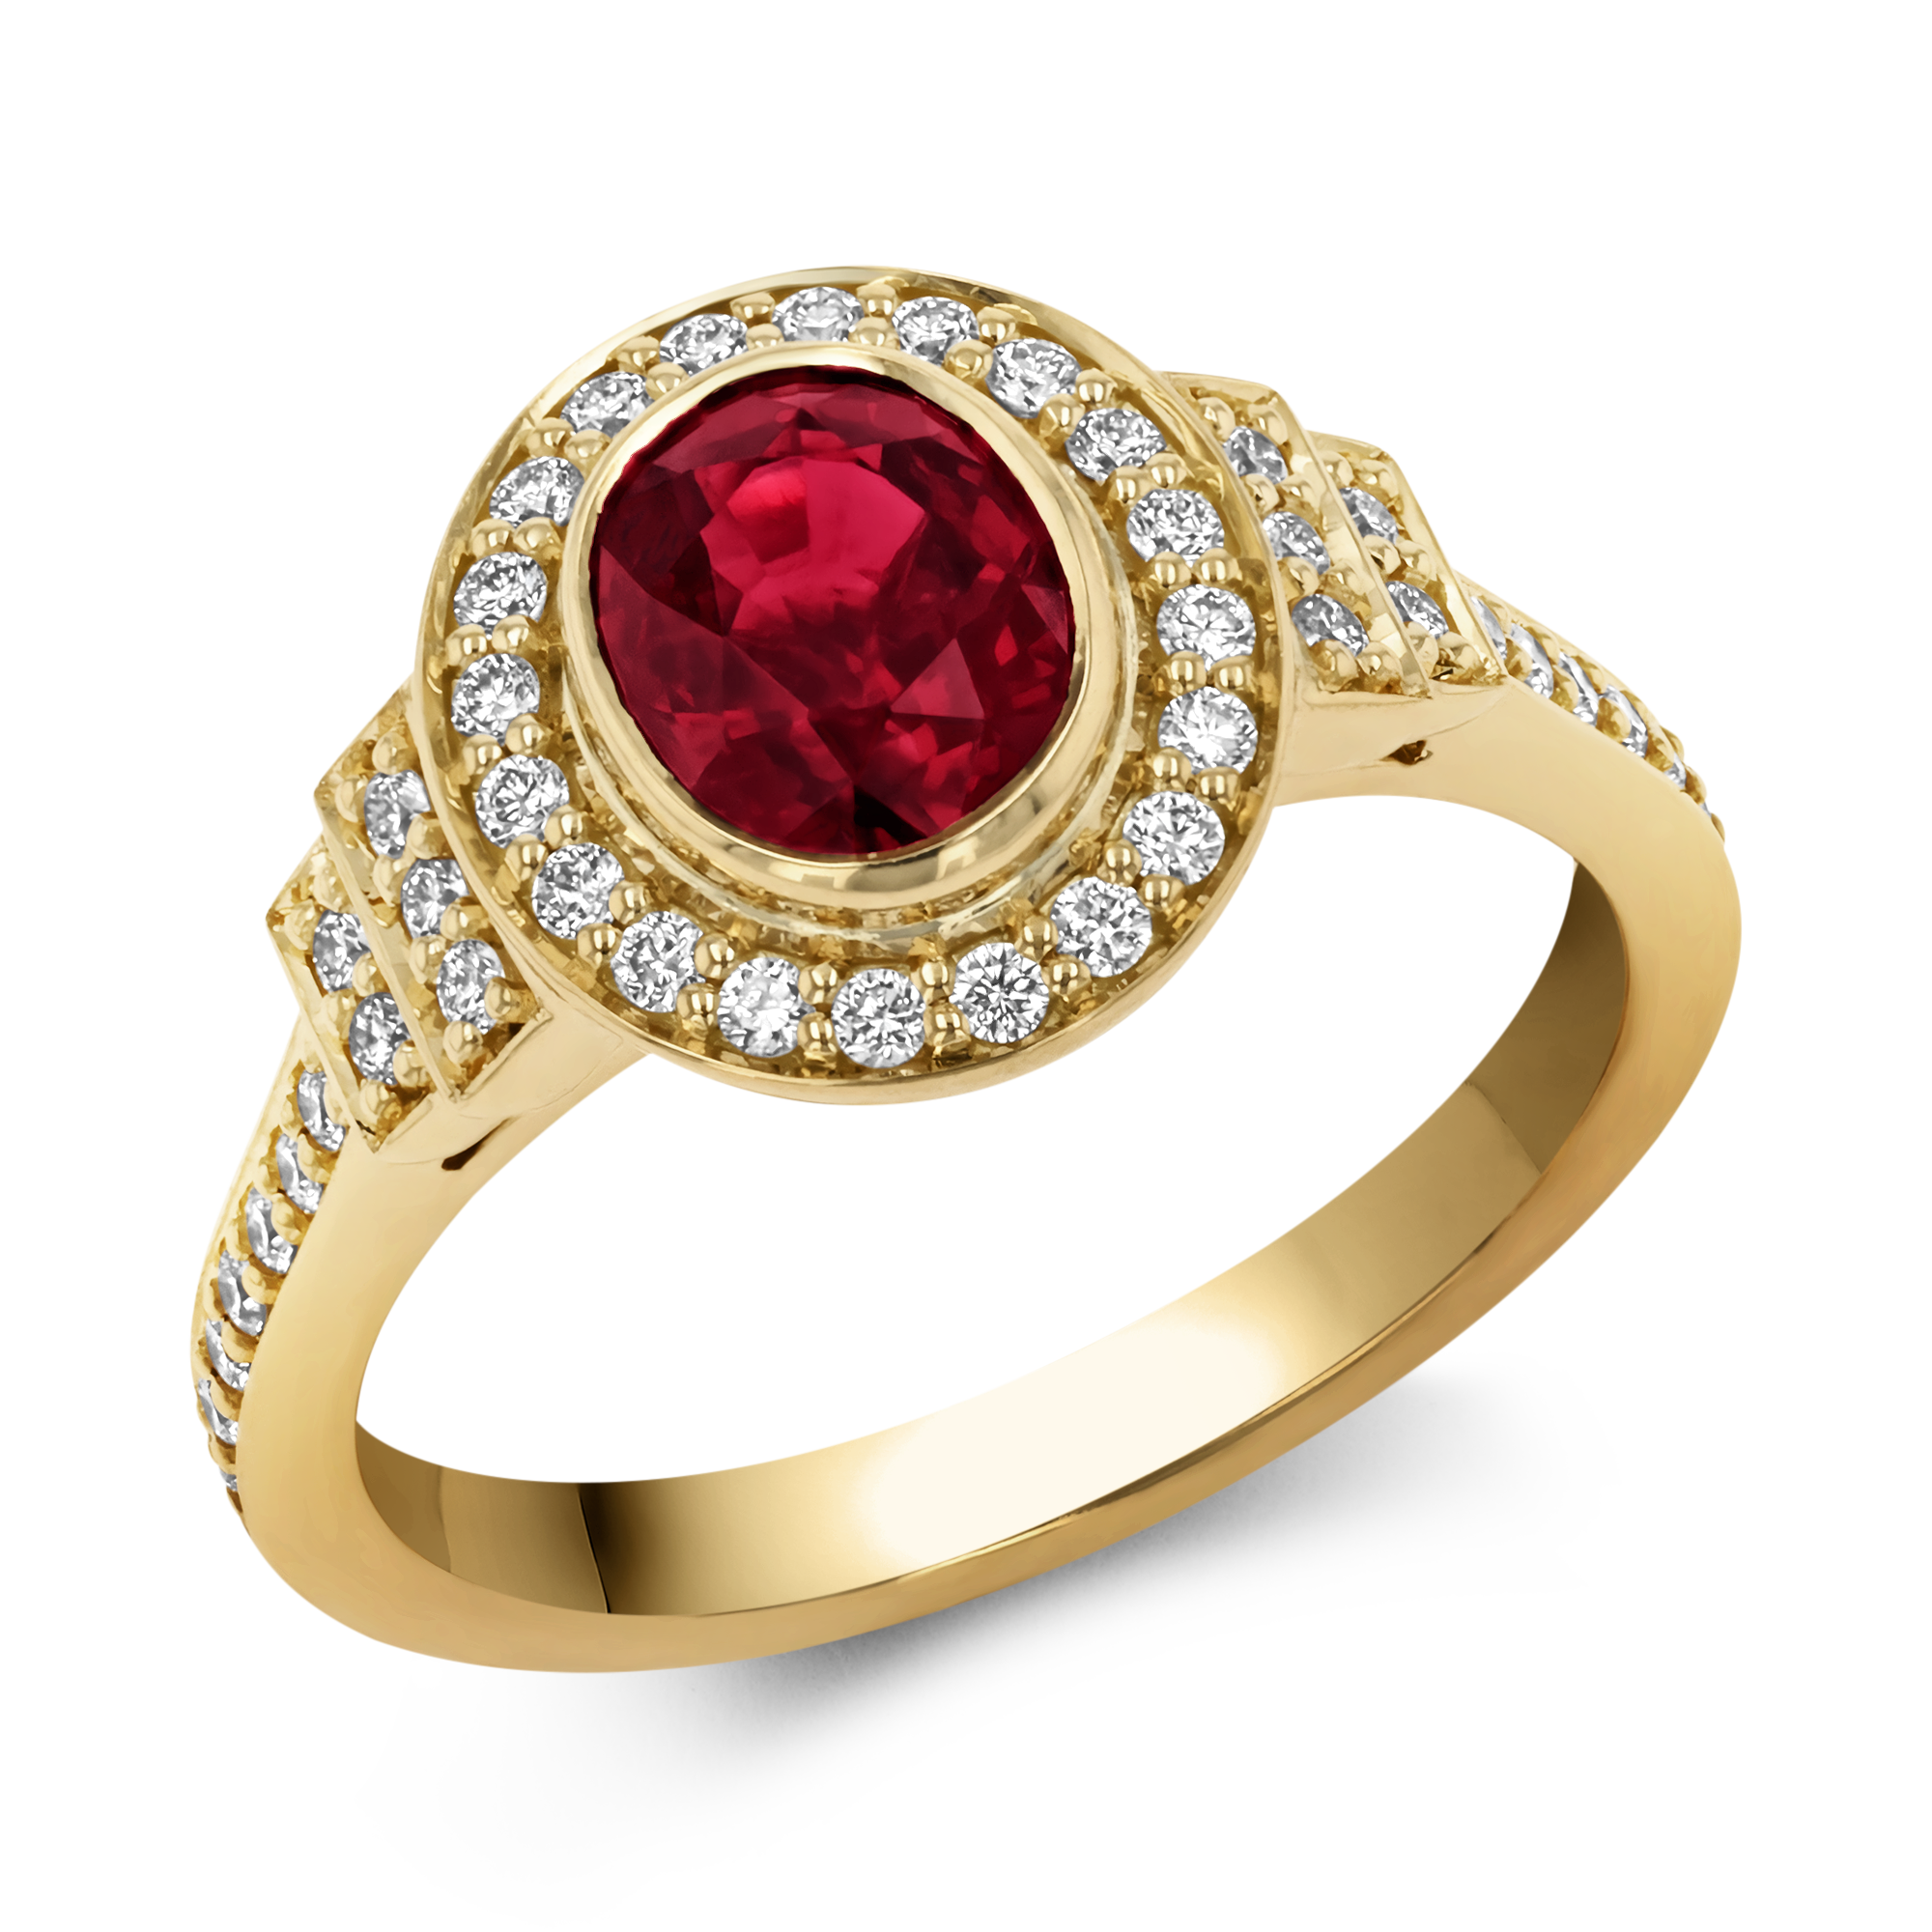 Mozambique 1.61ct Ruby and Diamond Cluster Ring Oval Cut, Rubover Set_1